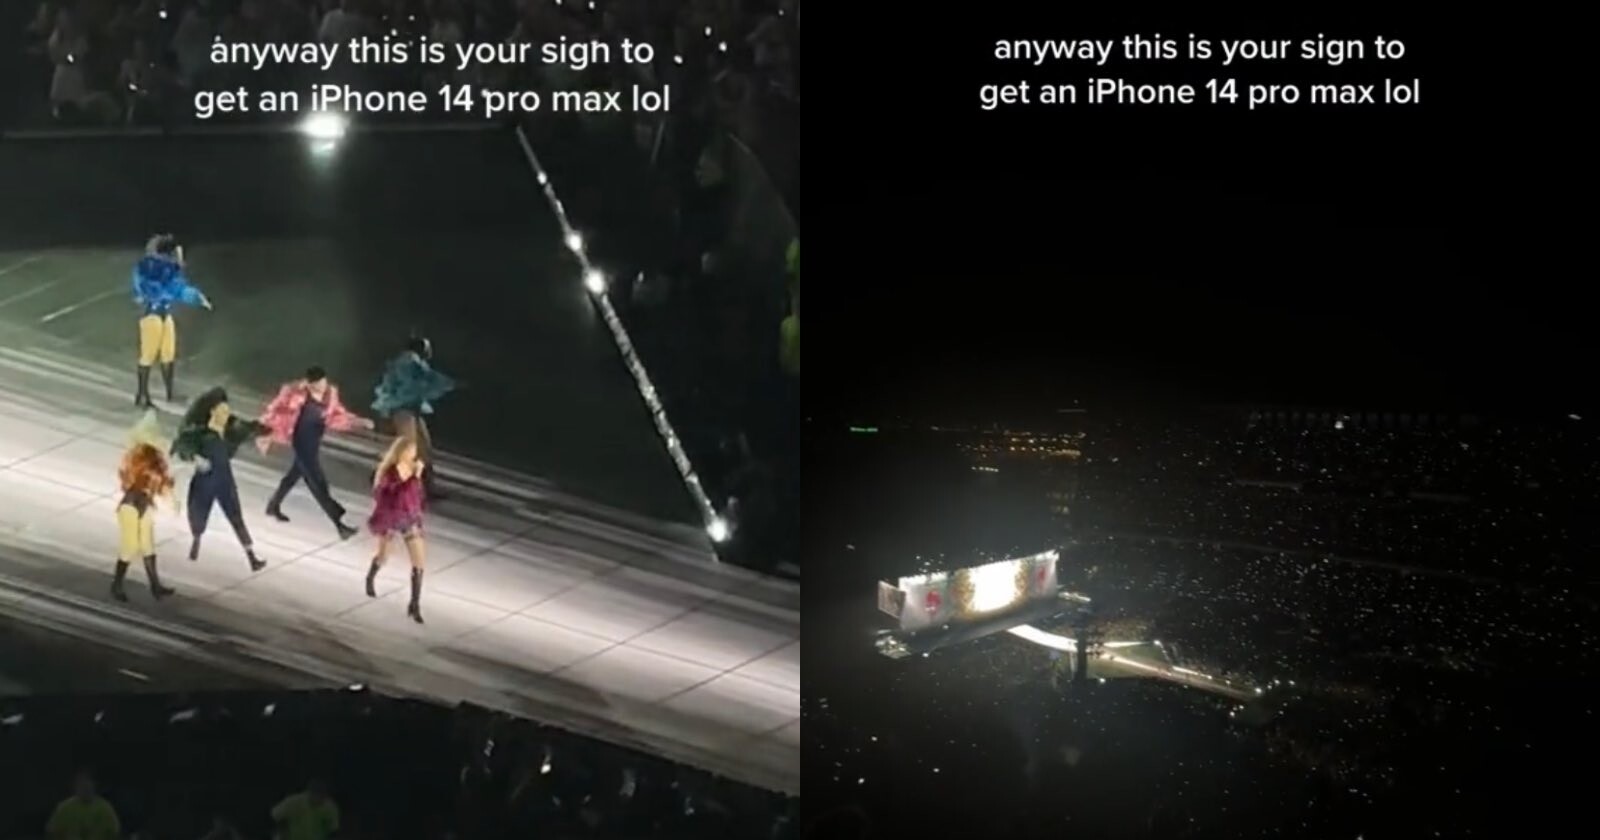 Taylor Swift Eras concert on Apple iphone pro 14 max zoom